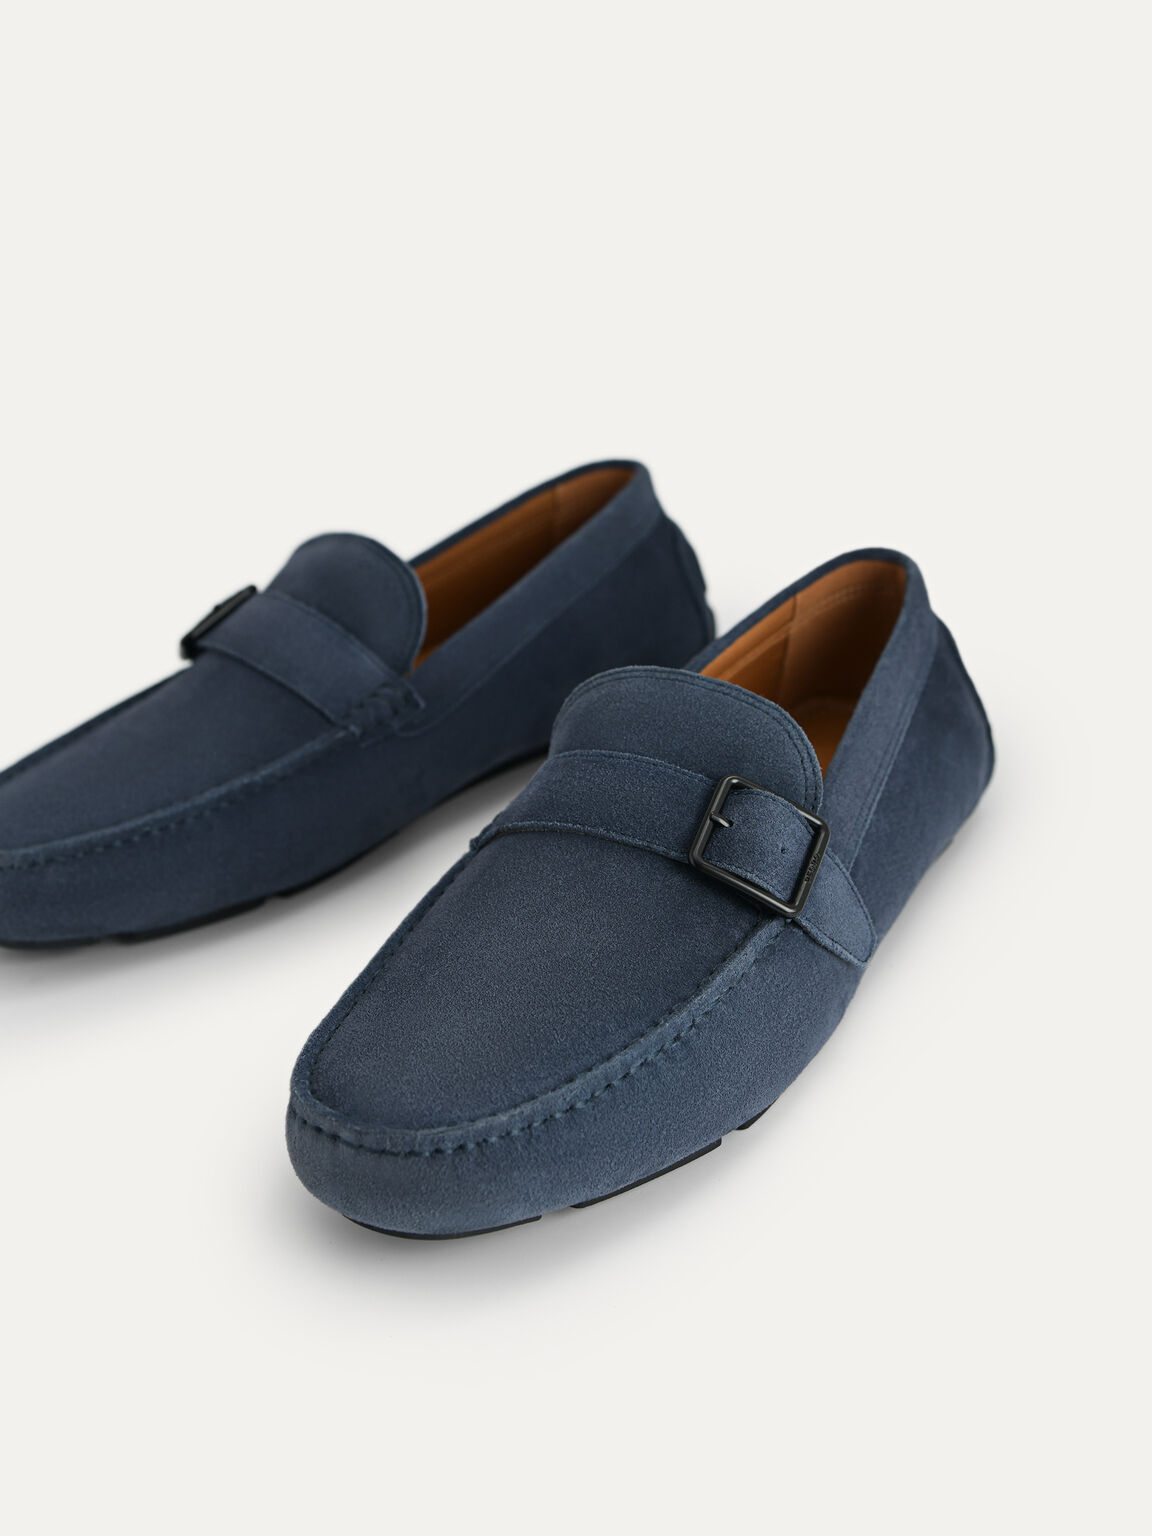 Suede Leather Moccasins with Buckle Detailing, Navy, hi-res